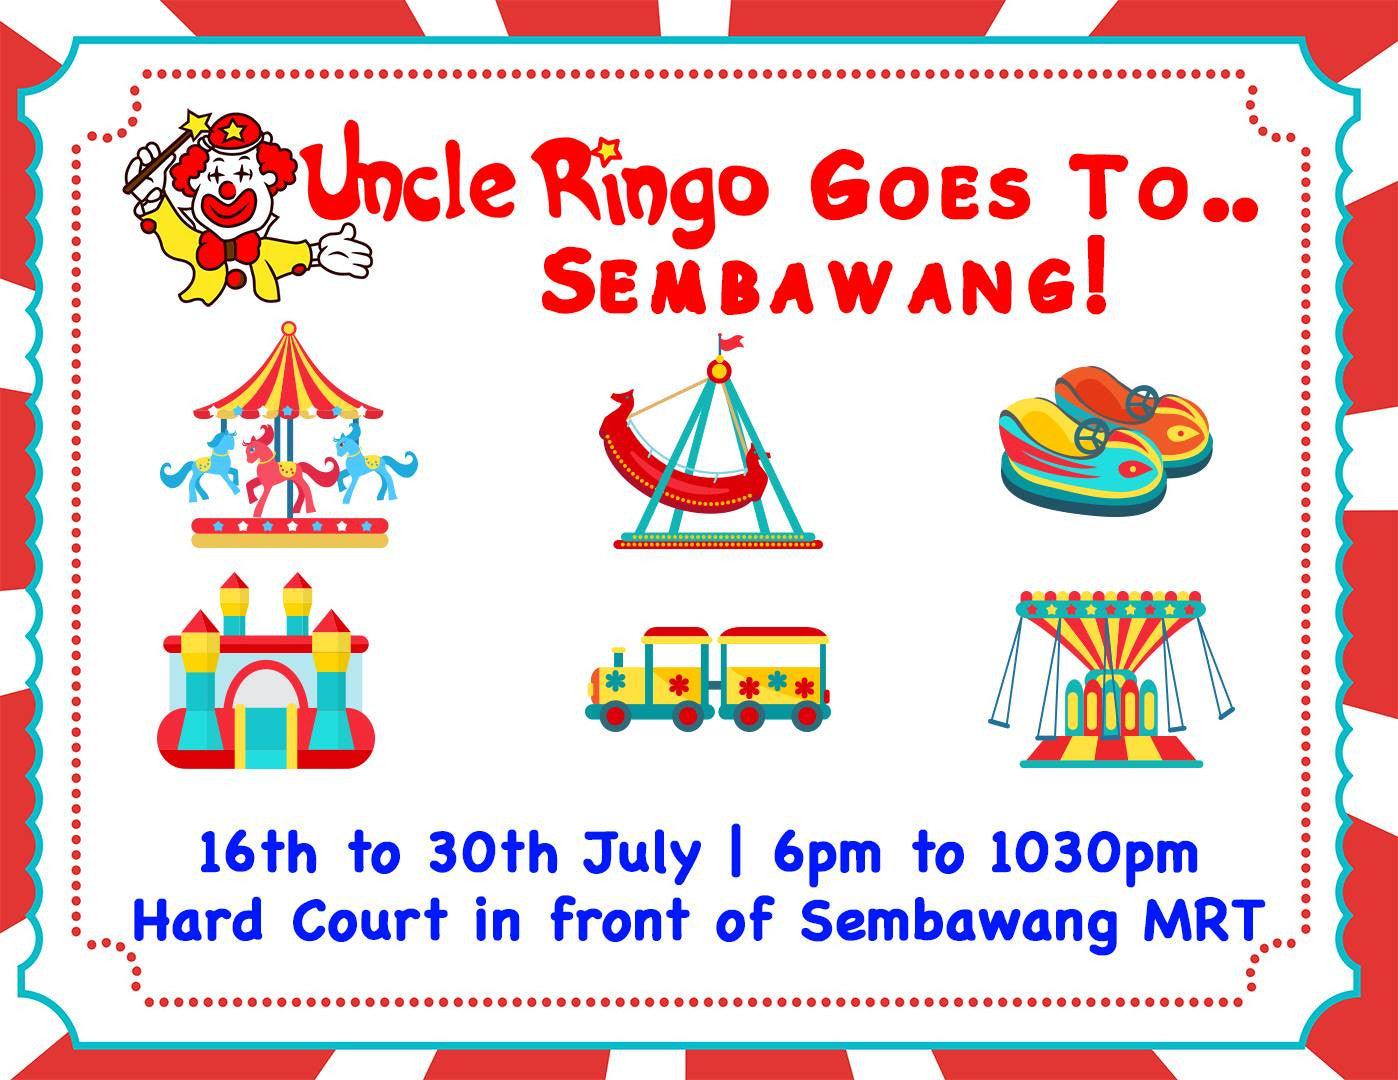 Things to do this Weekend: Uncle Ringo goes to Sembawang!